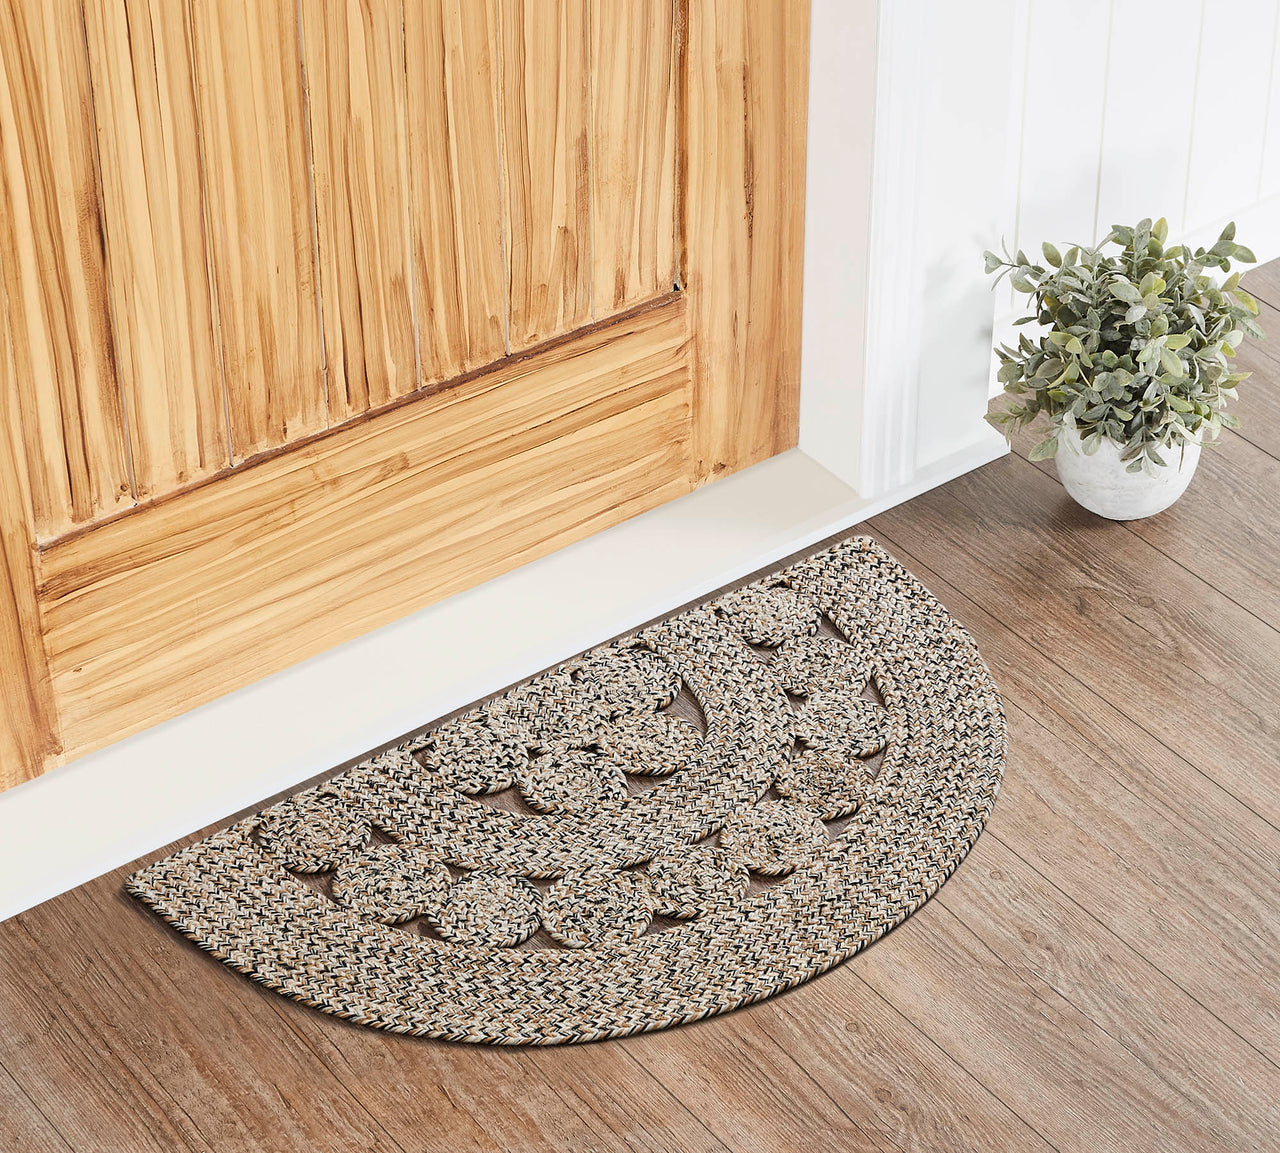 Celeste Blended Pebble Indoor/Outdoor Half Circle Braided Rug 19.5"x36" VHC Brands